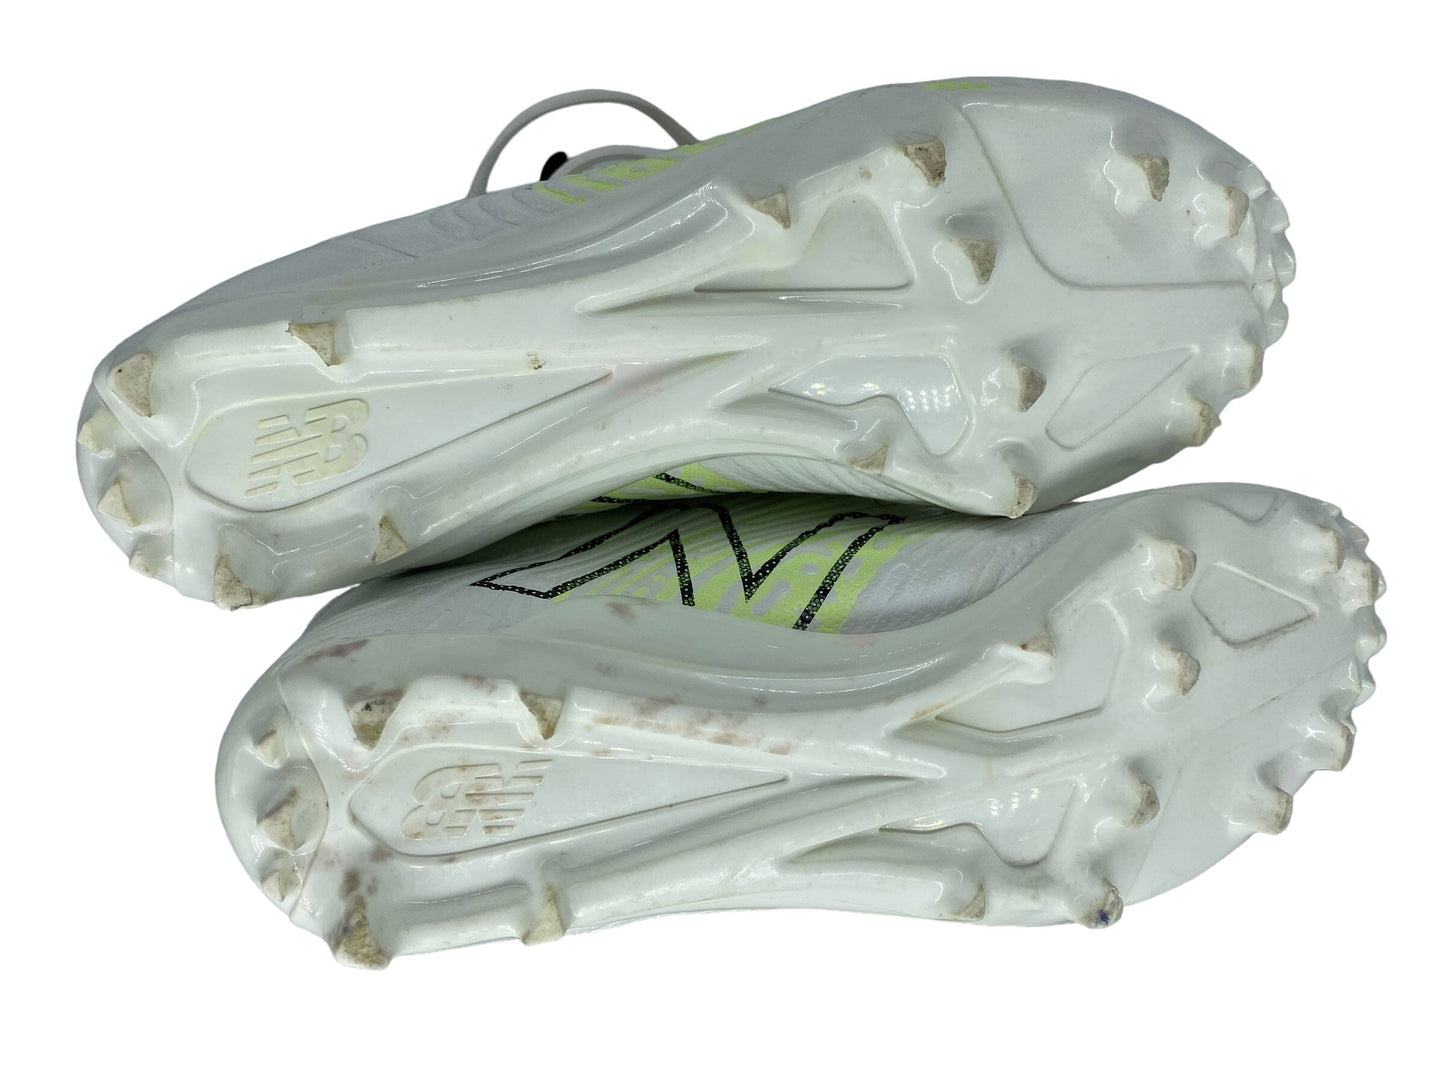 Used New Balance Cleats - White - size 10 Paintball Gun from CPXBrosPaintball Buy/Sell/Trade Paintball Markers, New Paintball Guns, Paintball Hoppers, Paintball Masks, and Hormesis Headbands